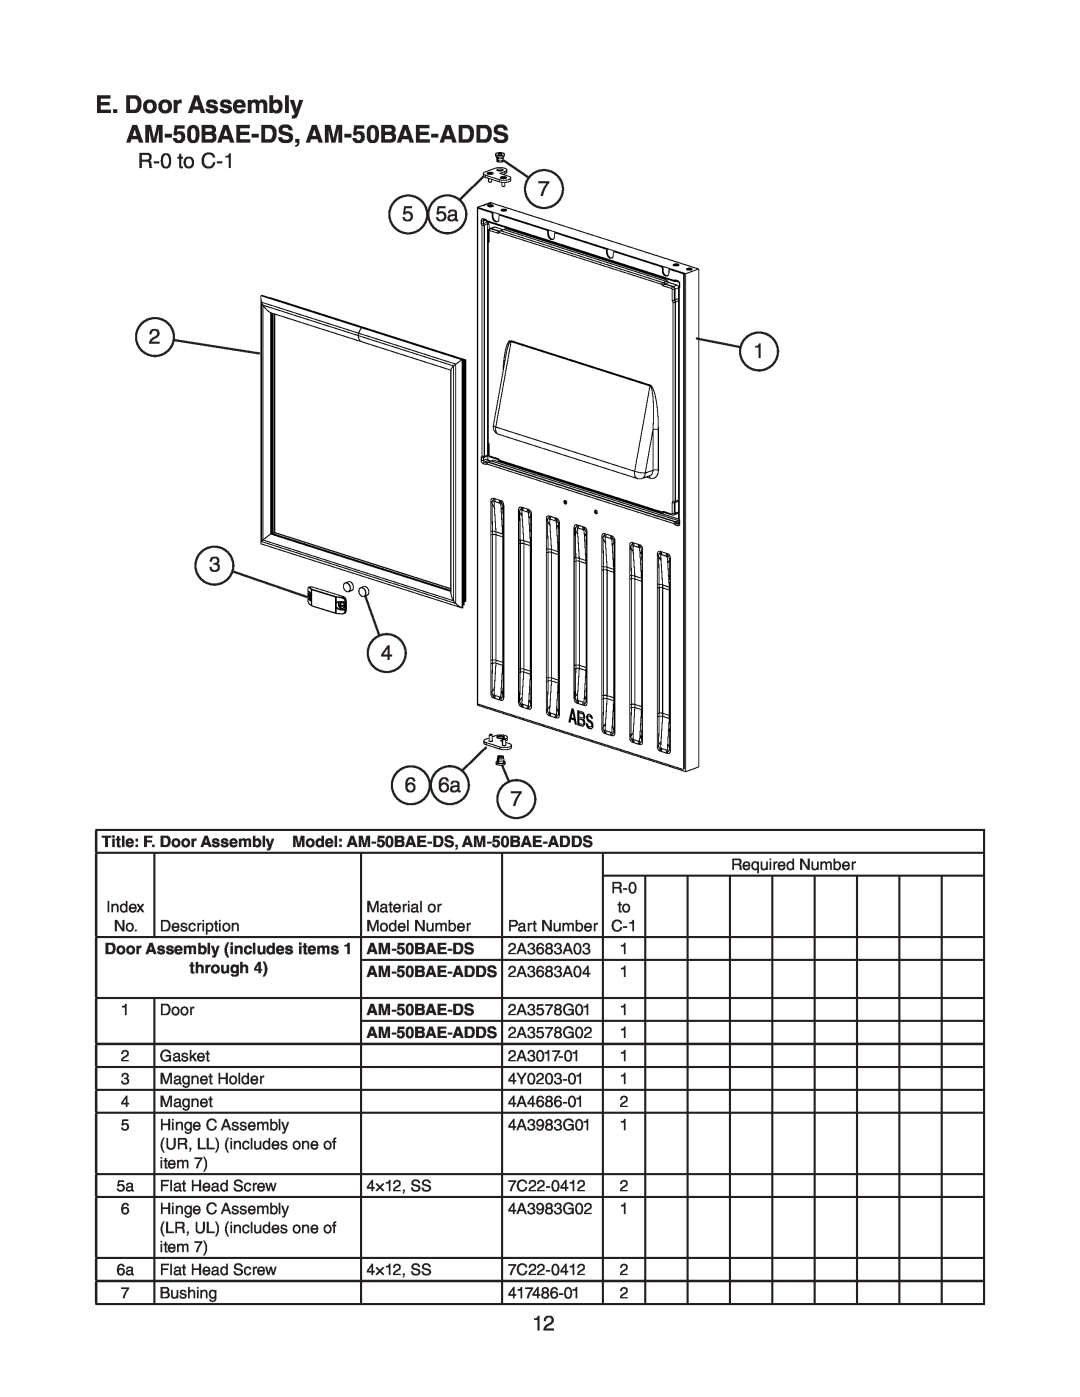 Hoshizaki manual E. Door Assembly AM-50BAE-DS, AM-50BAE-ADDS, Door Assembly includes items, through 